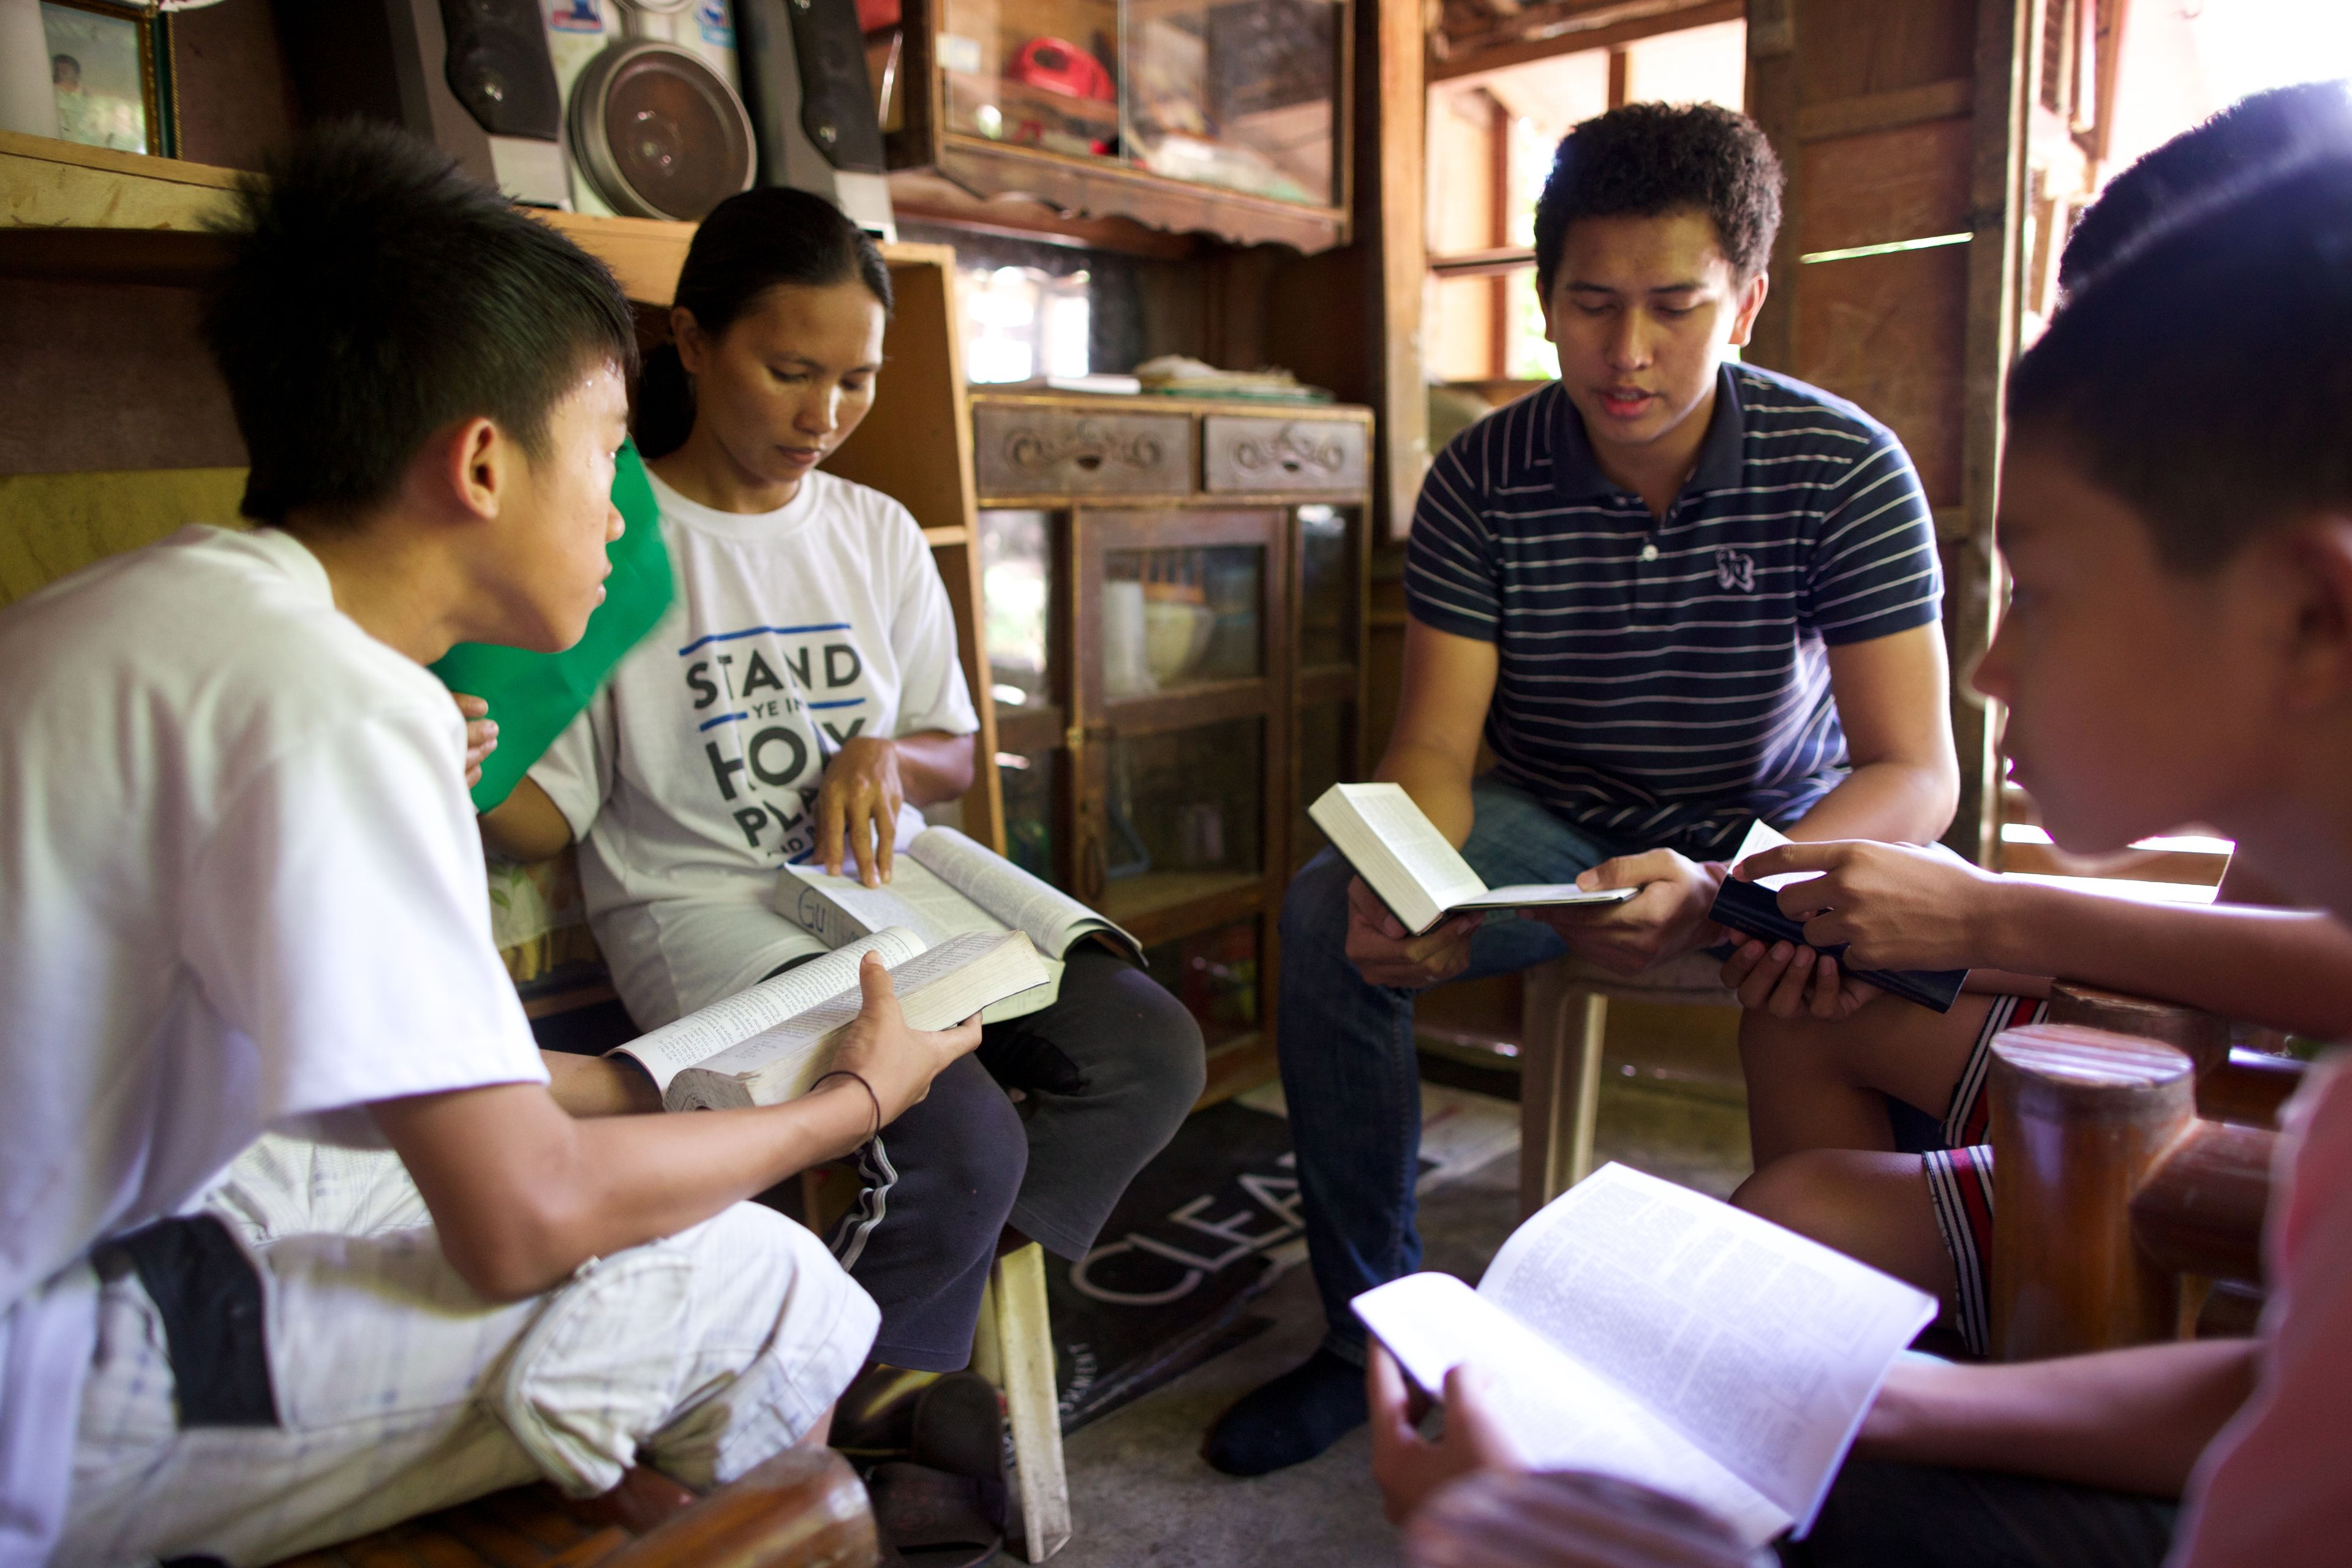 Ministering brothers teaching a family in the Philippines.